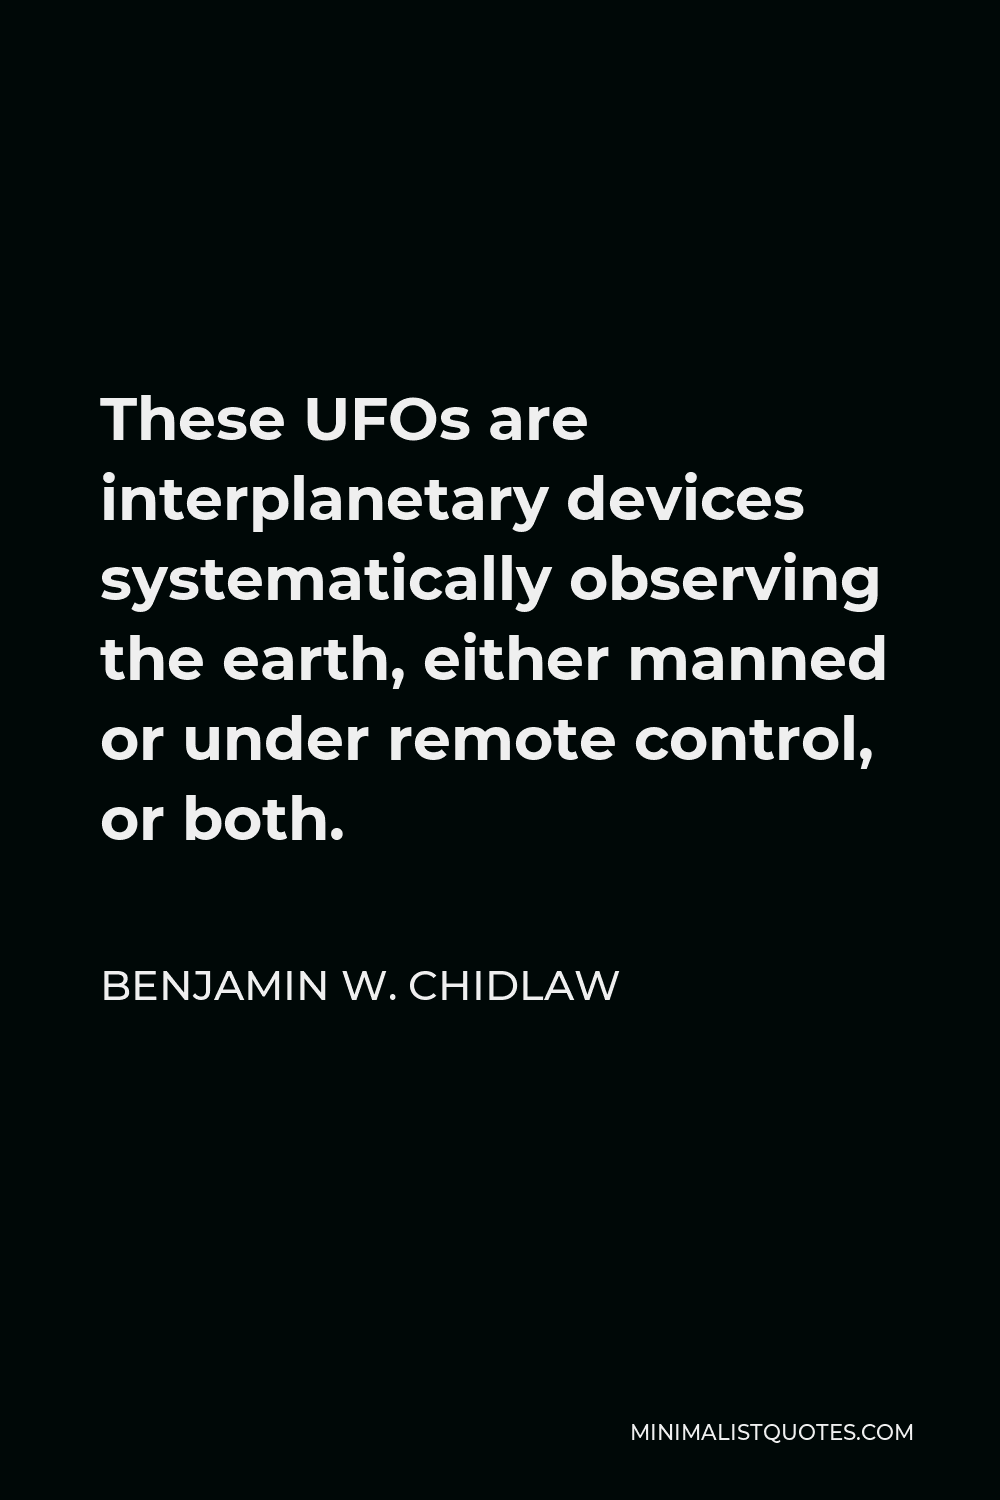 Benjamin W. Chidlaw Quote - These UFOs are interplanetary devices systematically observing the earth, either manned or under remote control, or both.